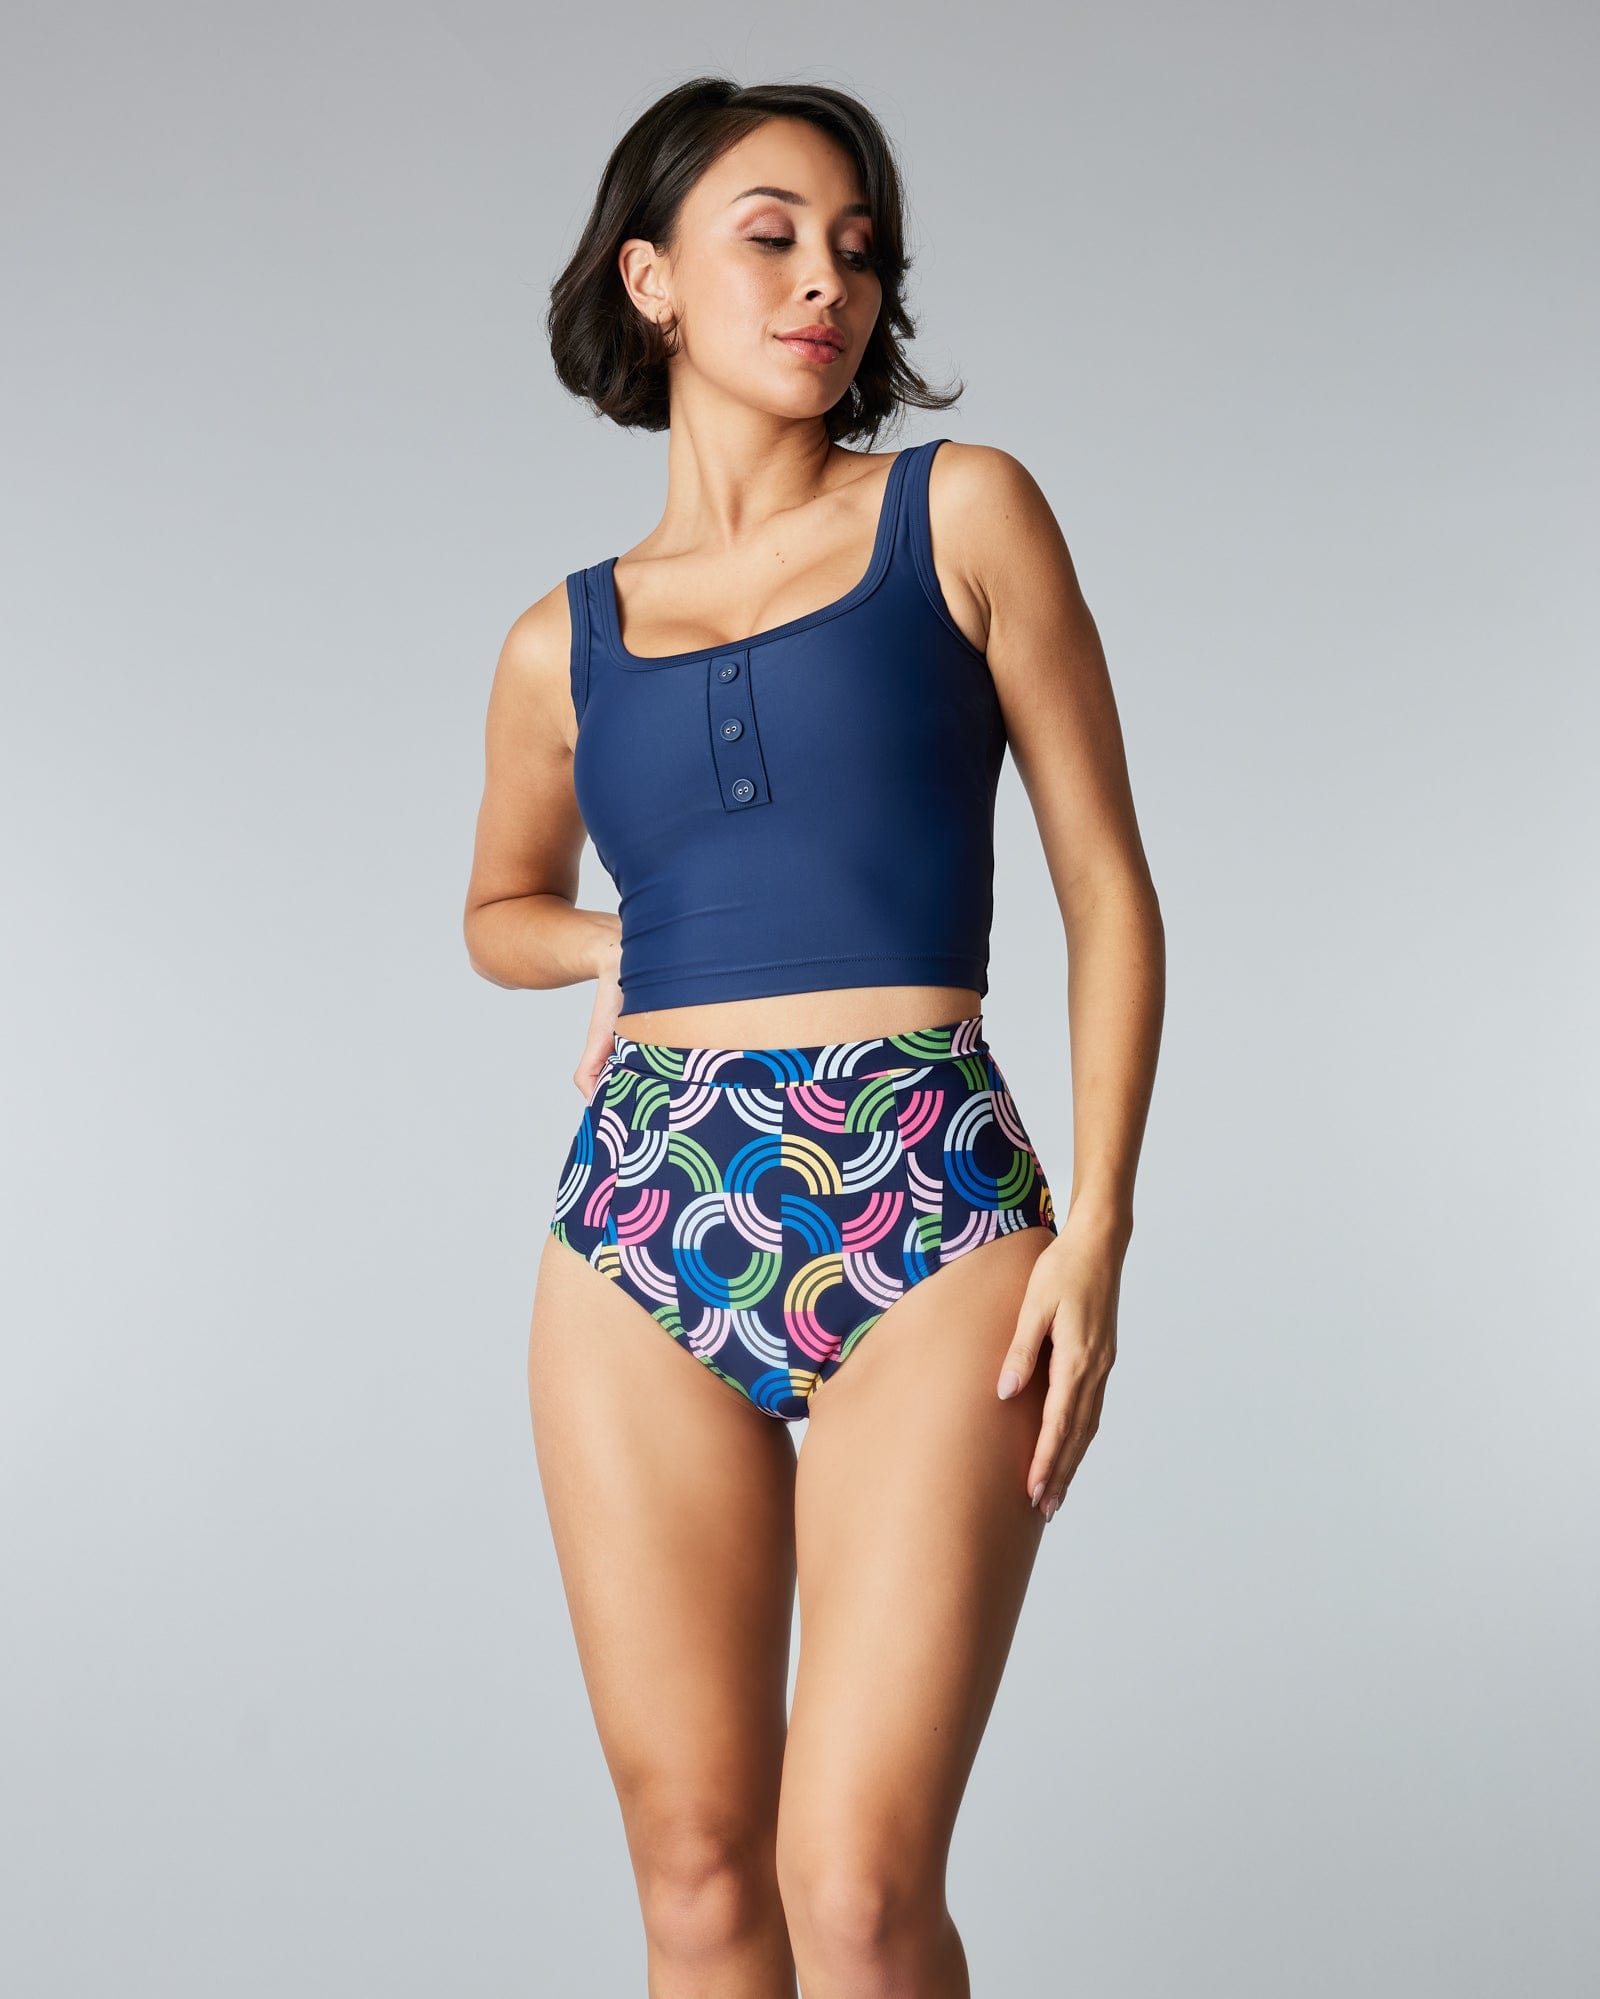 Woman in a two-piece swimsuit with a rainbow print and patterned top & bottom.